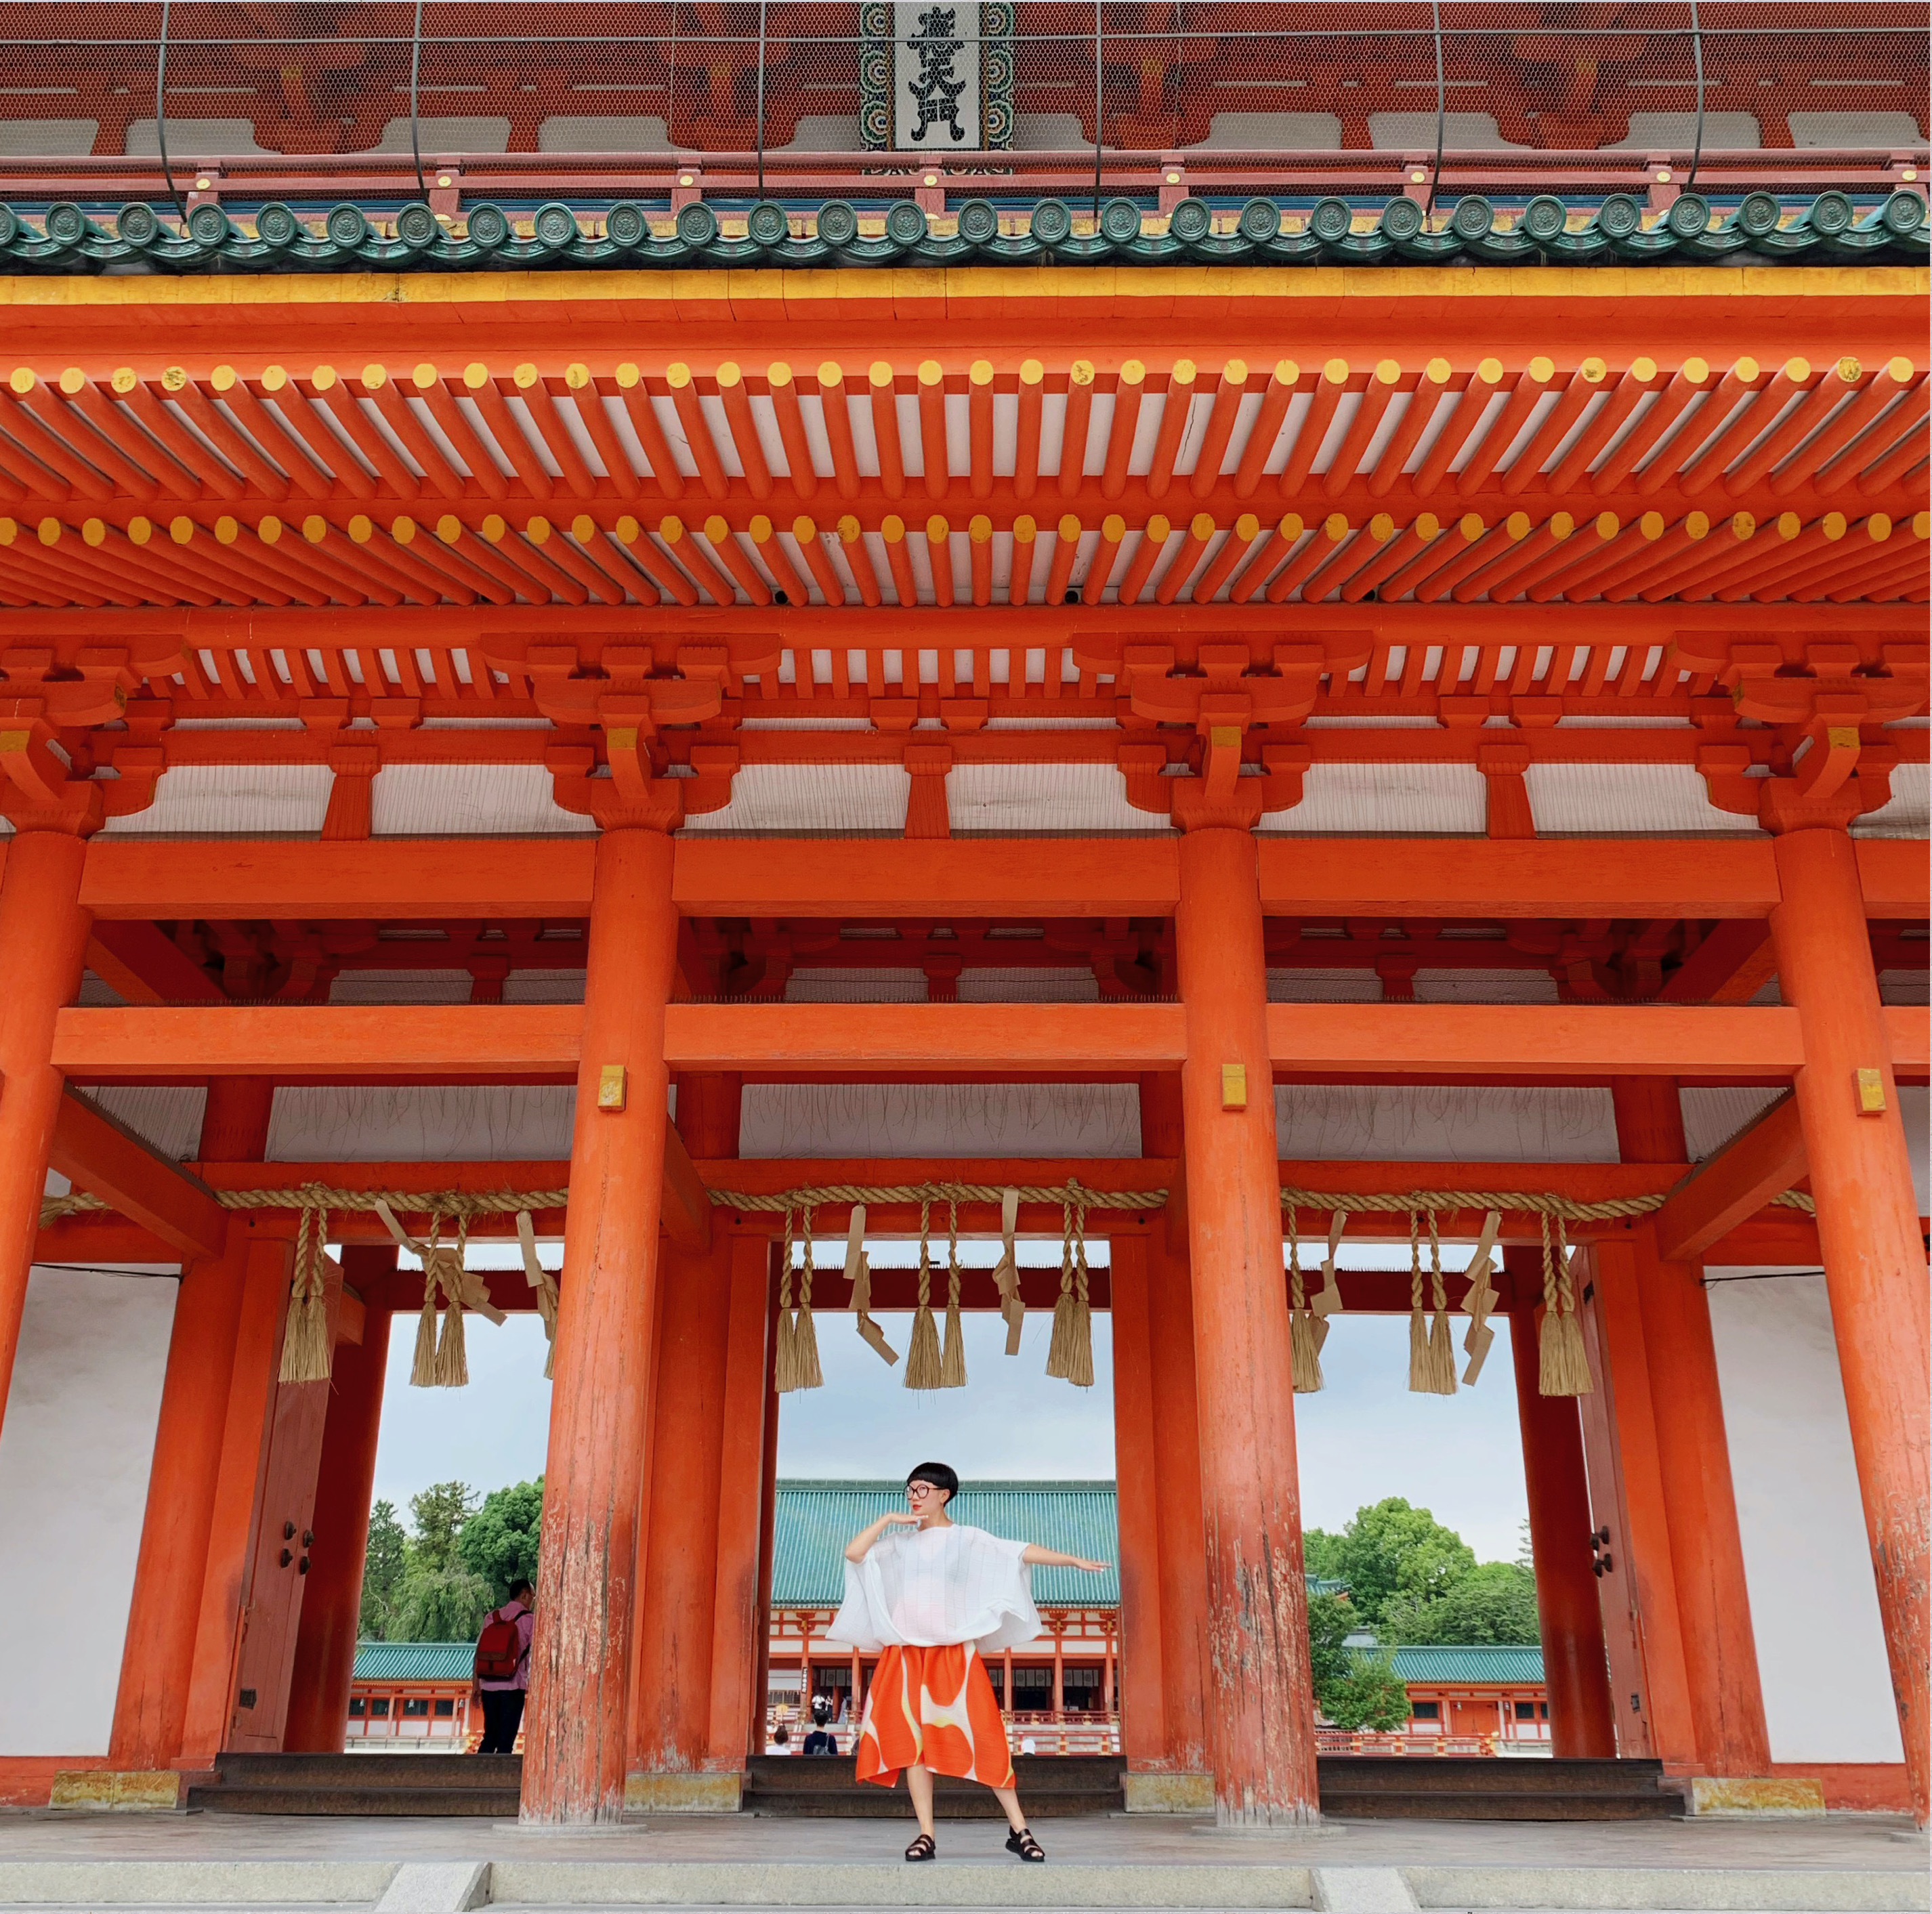 Fei in Kyoto, Japan, while traveling in Asia to speak at the ACC Roundtable in 2019